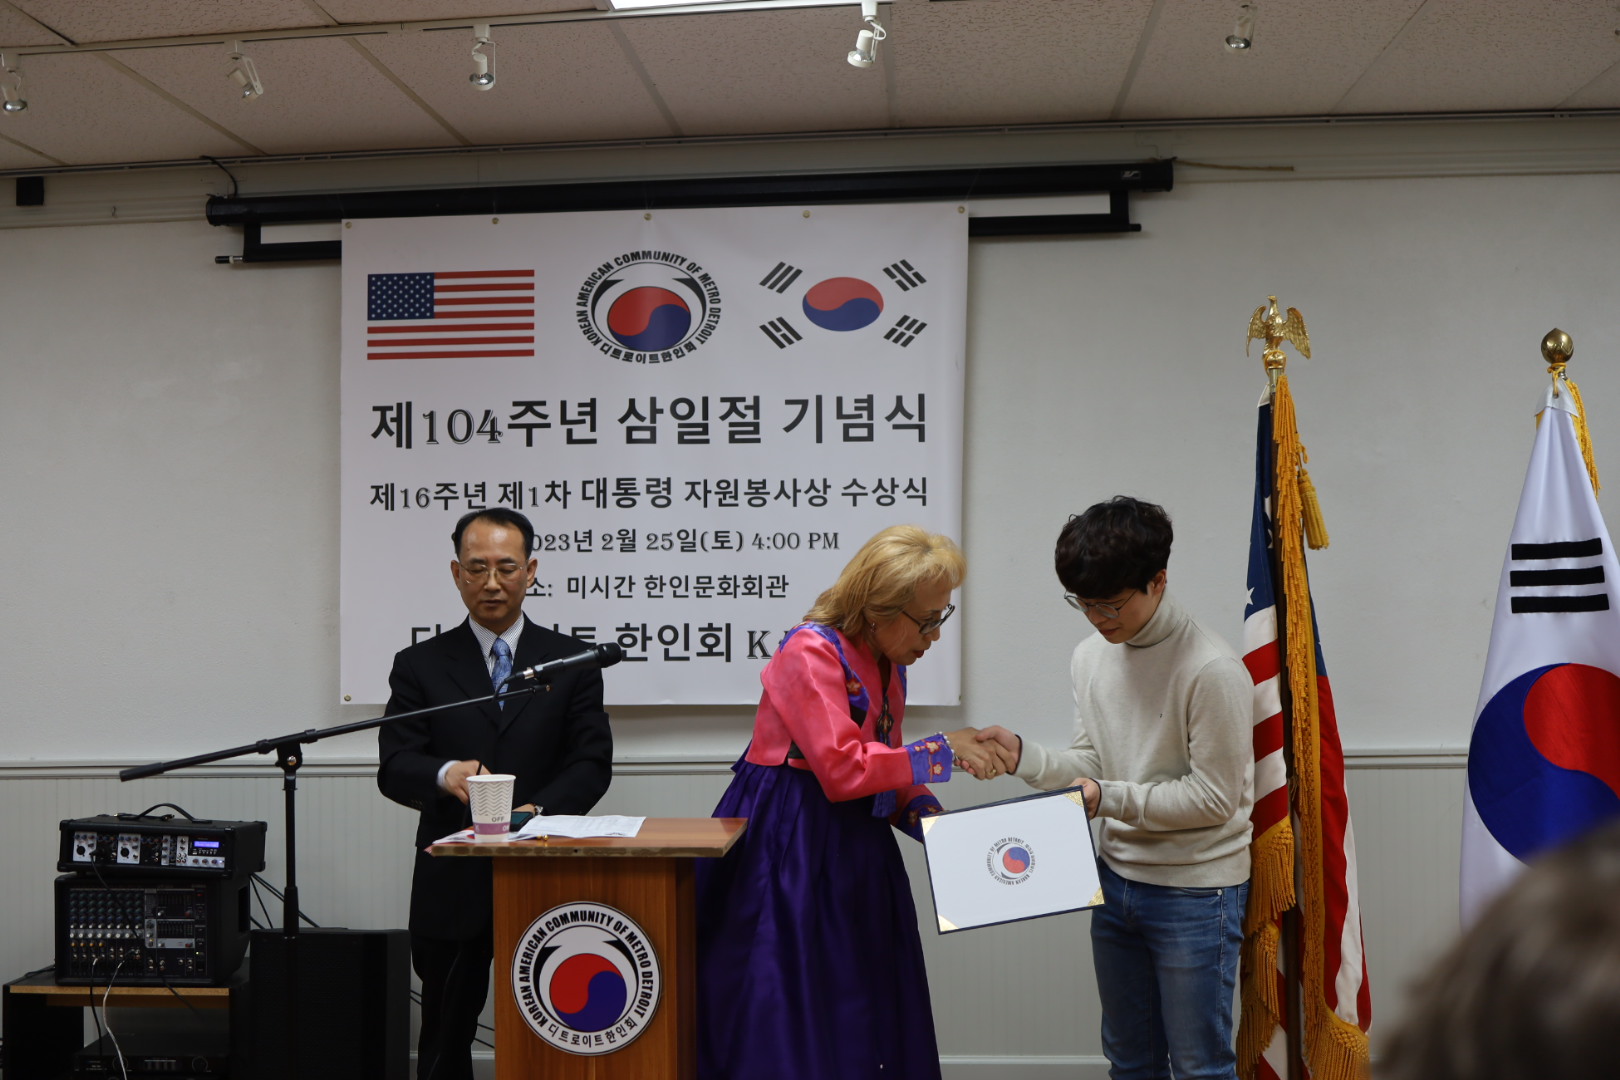 Lee Min-hui (16) receives a volunteer service award from the president of the Korean American Community of Metro Detroit